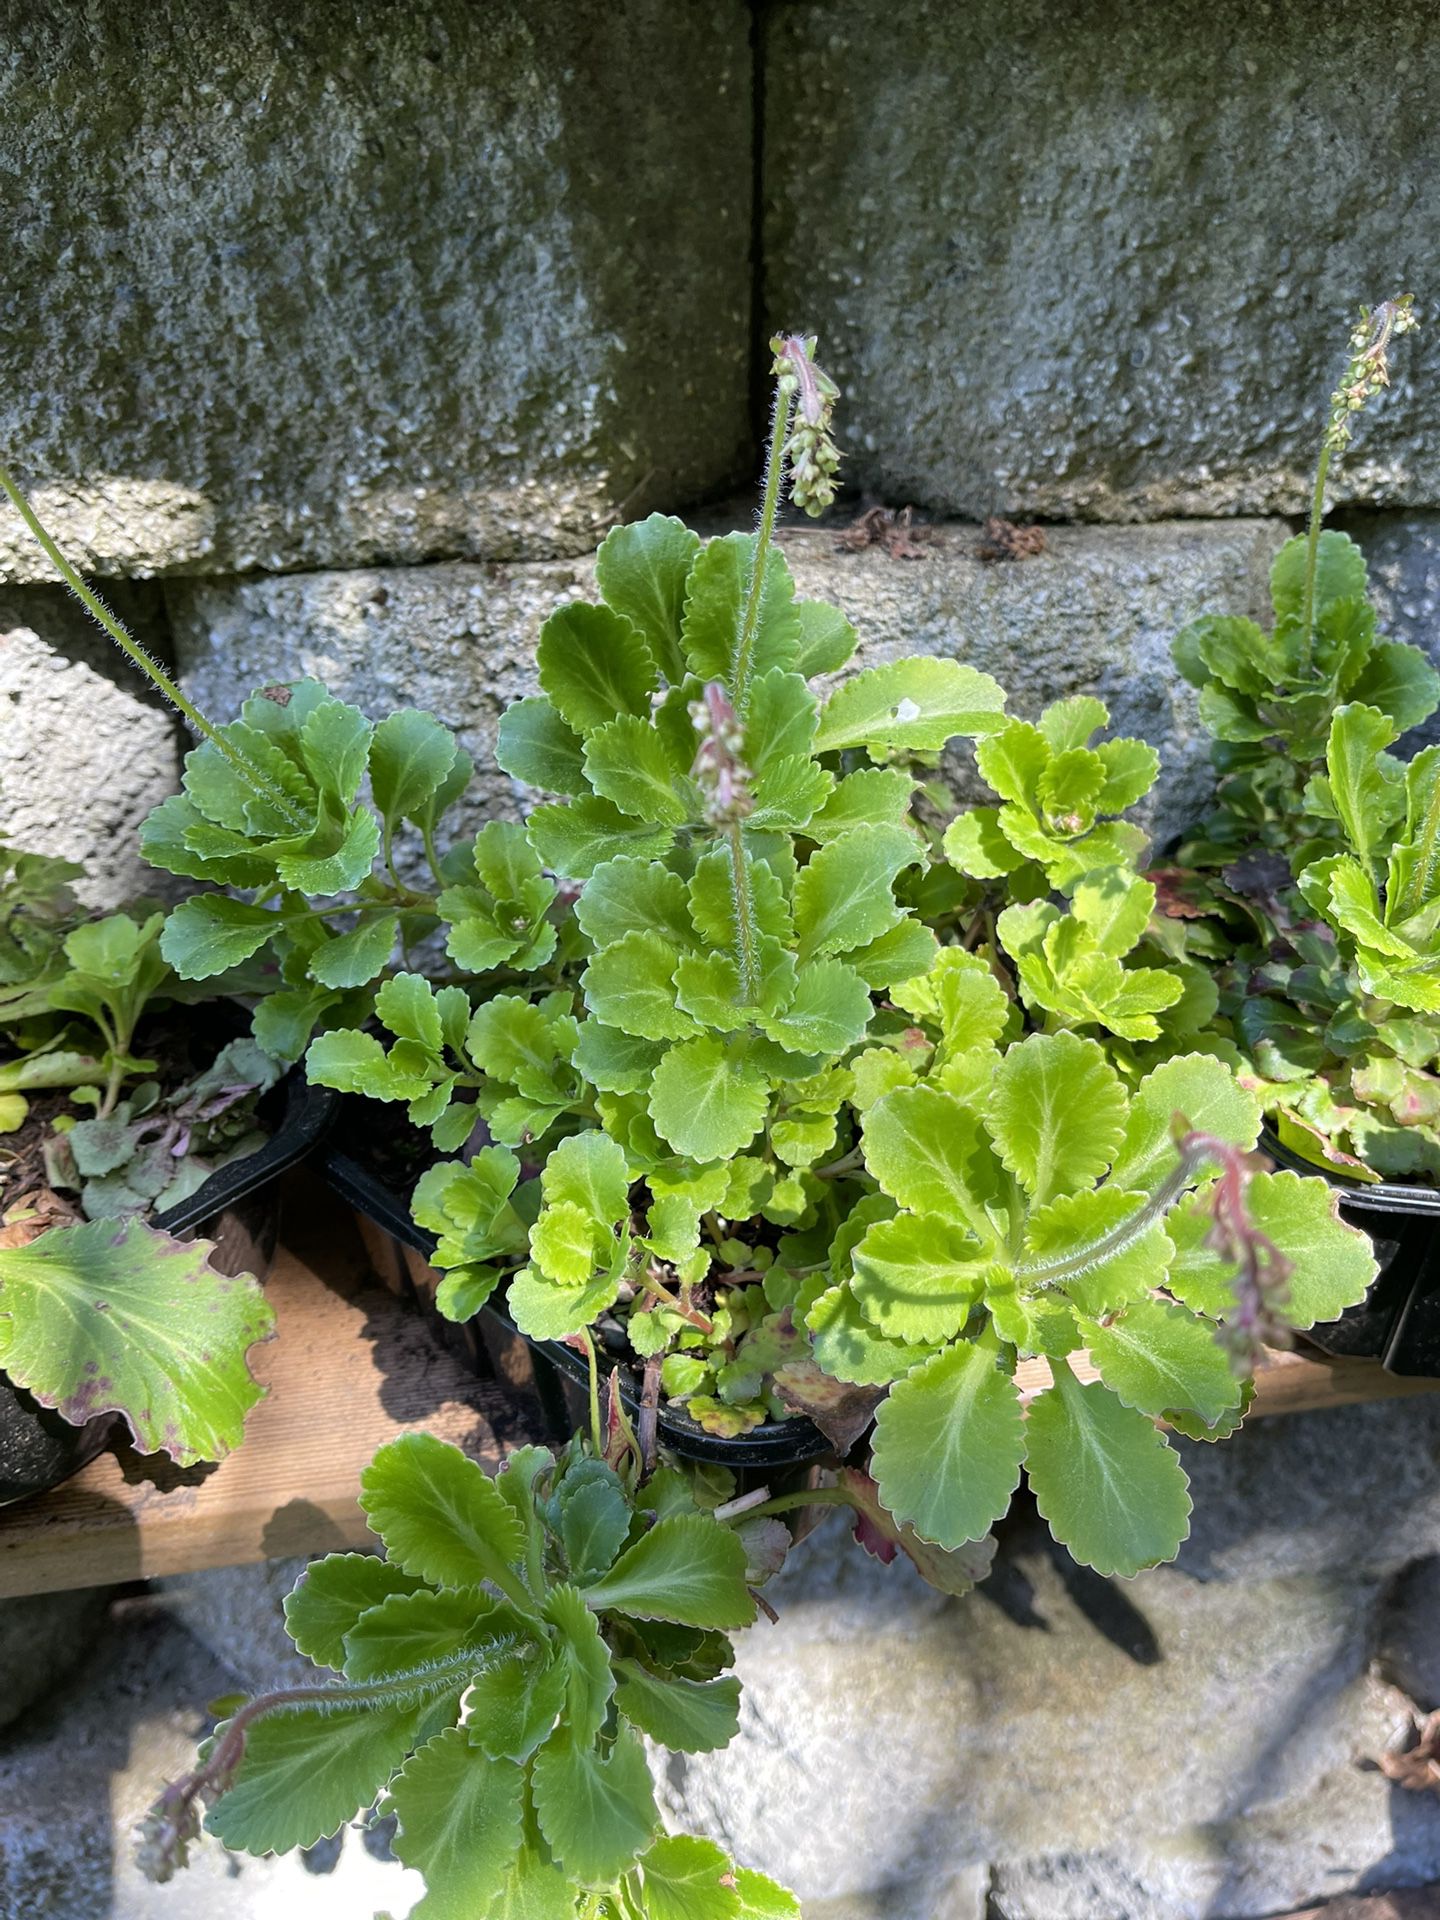 Saxifraga “London-Pride” Perennial Plant, Ground Cover Easy To Control. Blooms In Spring. 6"x6"pot.